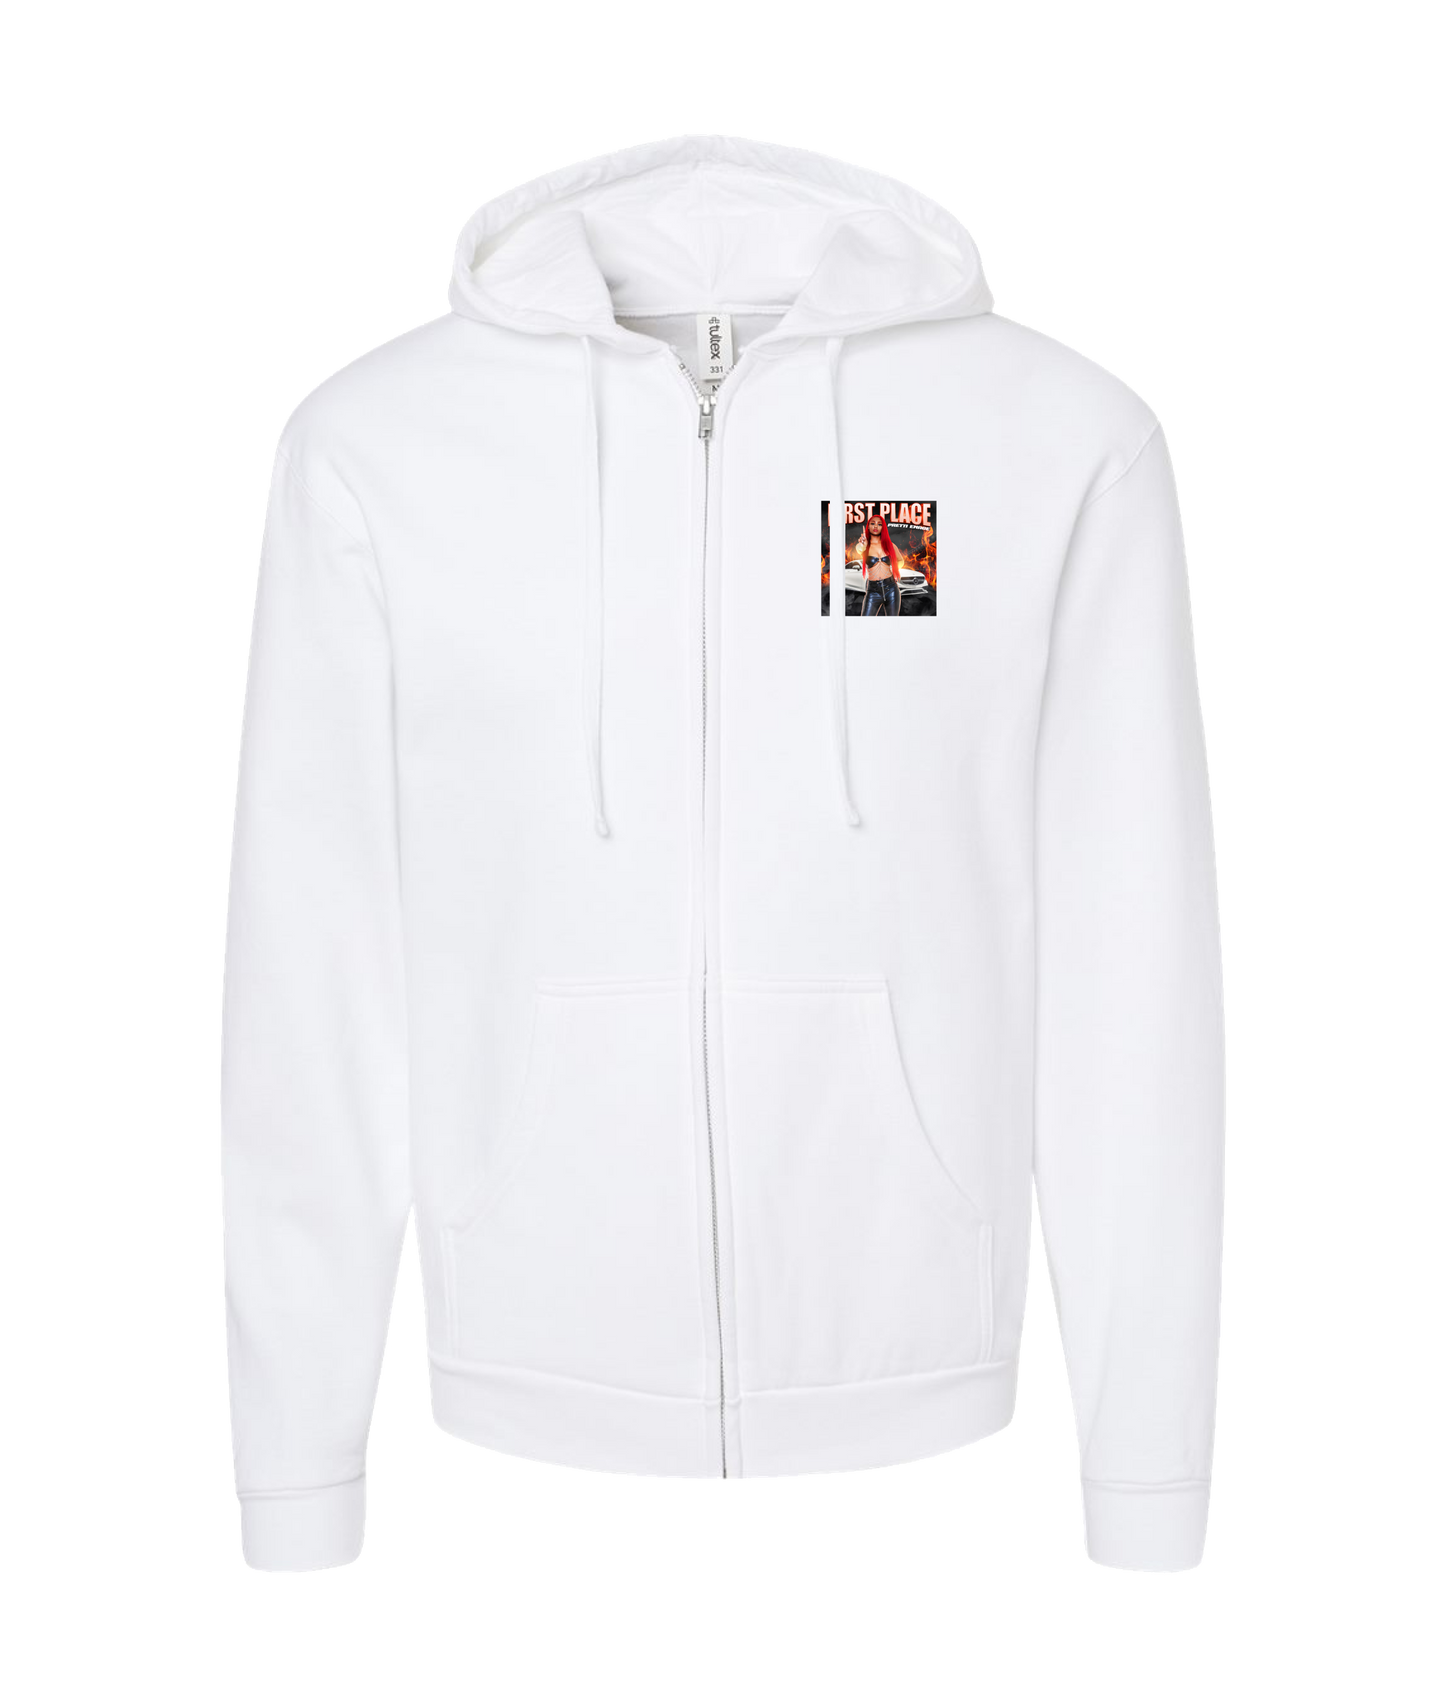 Pretti Emage - First Place - White Zip Up Hoodie